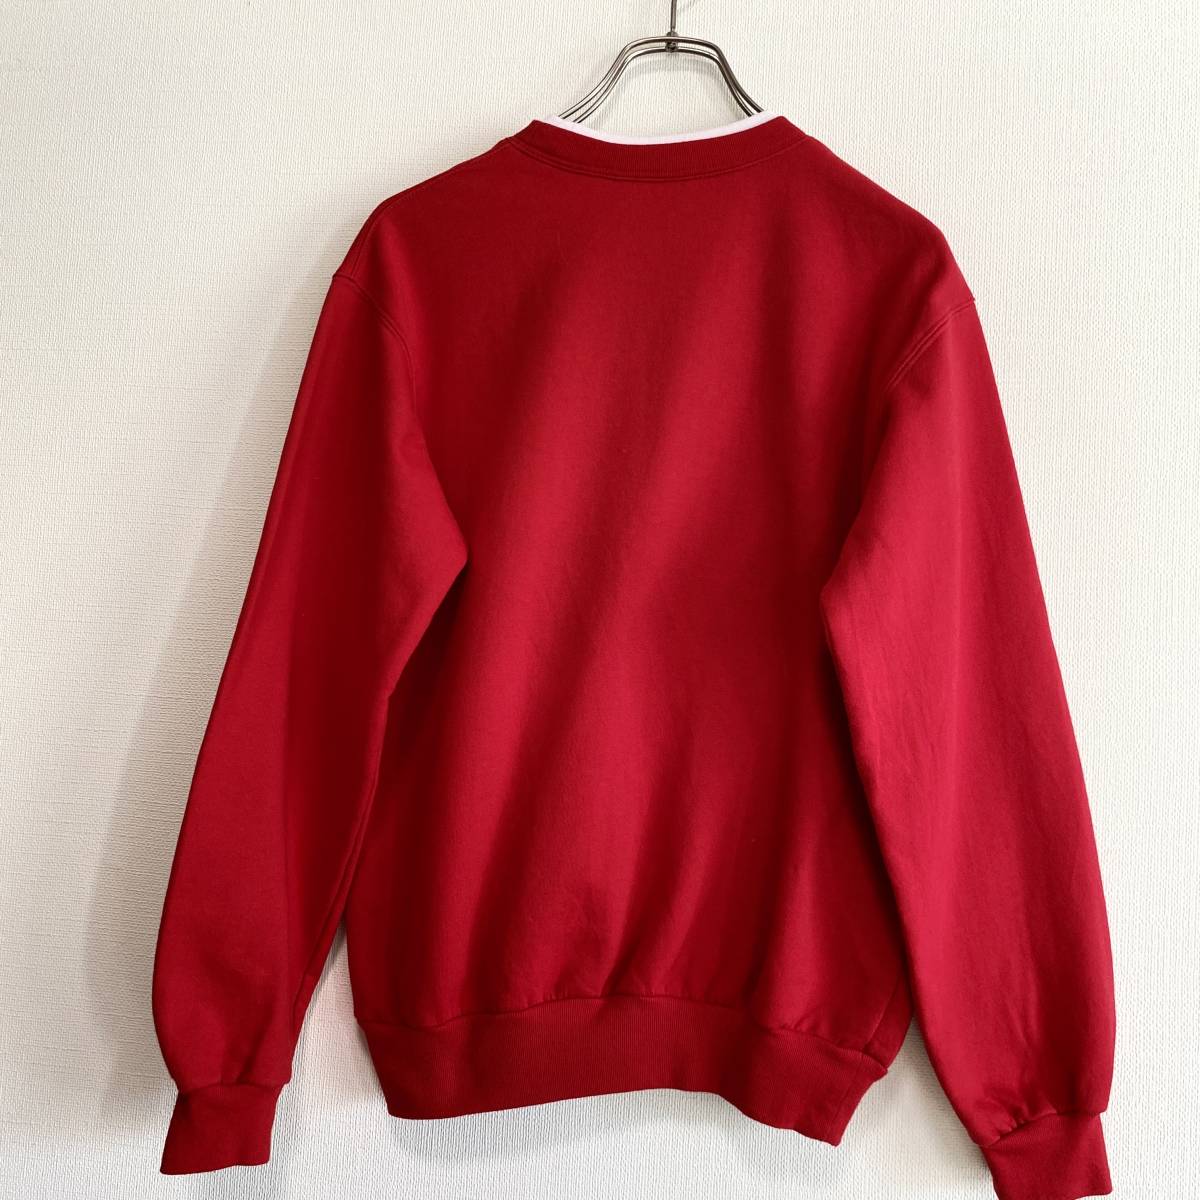  America old clothes snow ... embroidery sweatshirt sweat retro Vintage S size ....[R109]